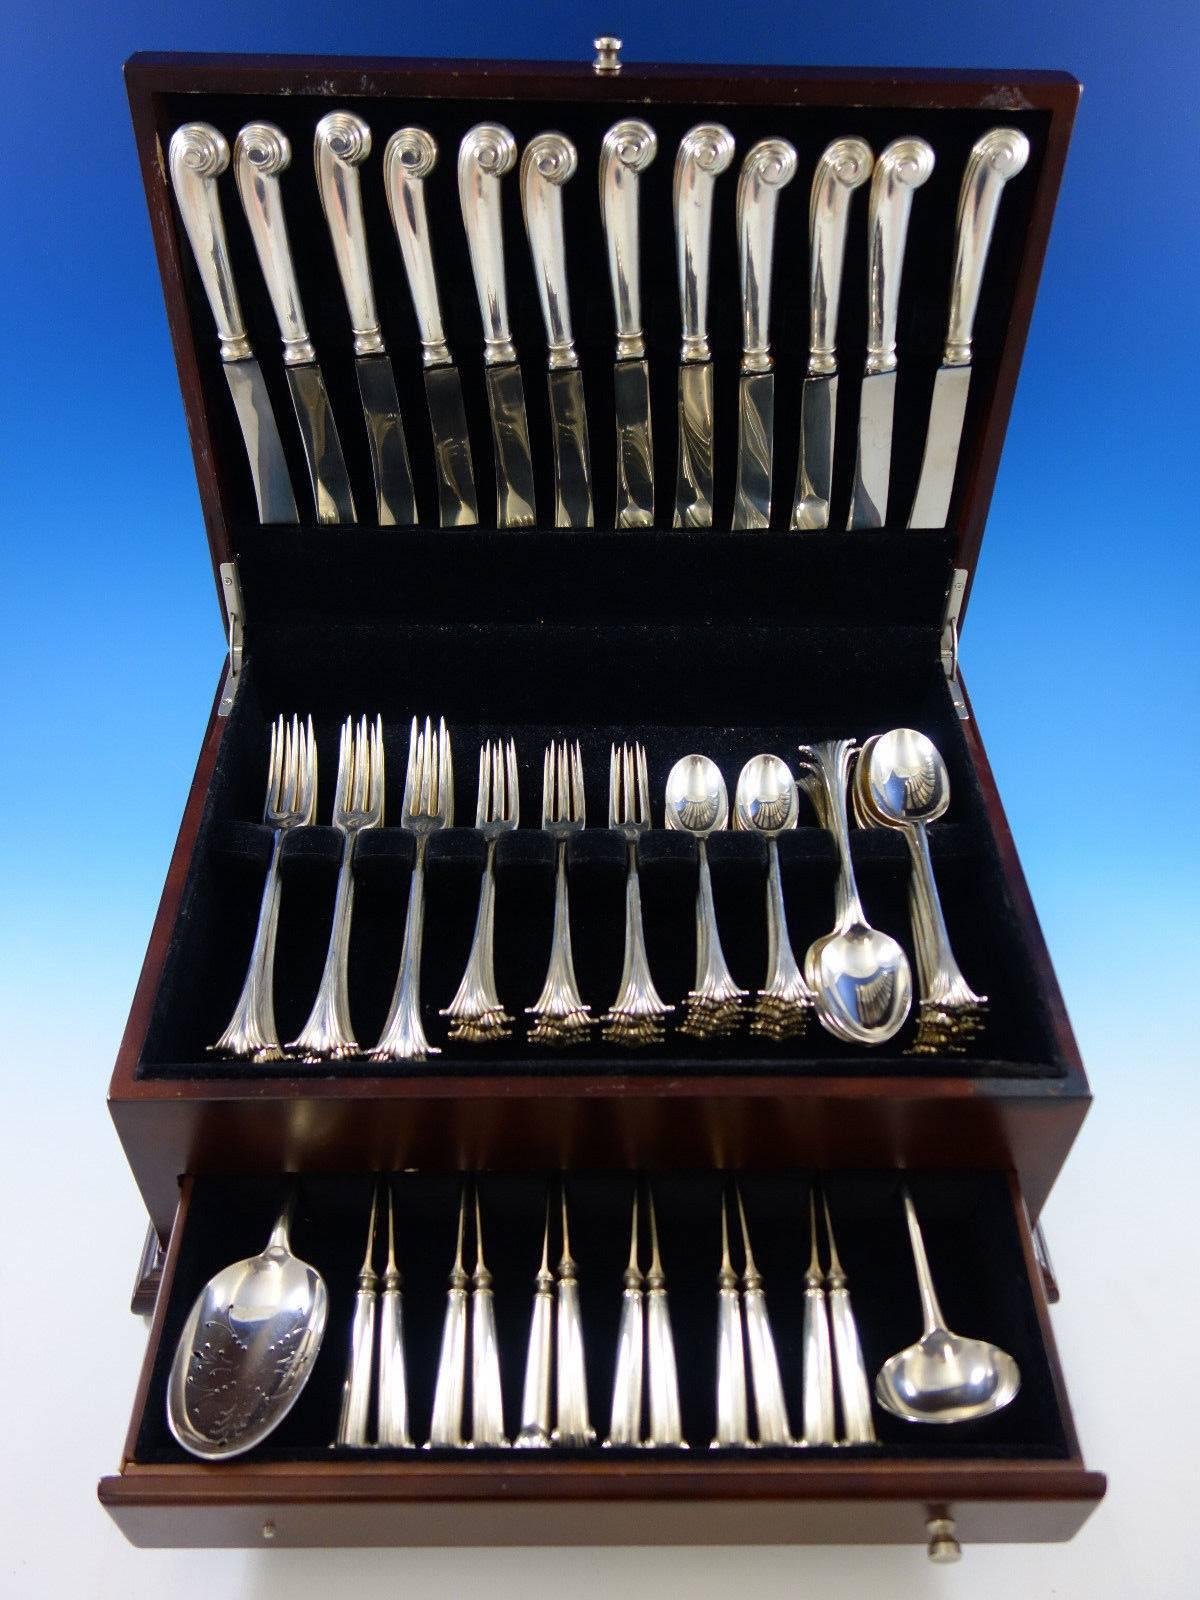 Dinner size scroll by James Robinson sterling silver flatware set, 74 pieces. This set includes: 

12 dinner size knives, pistol grip, 9 1/2